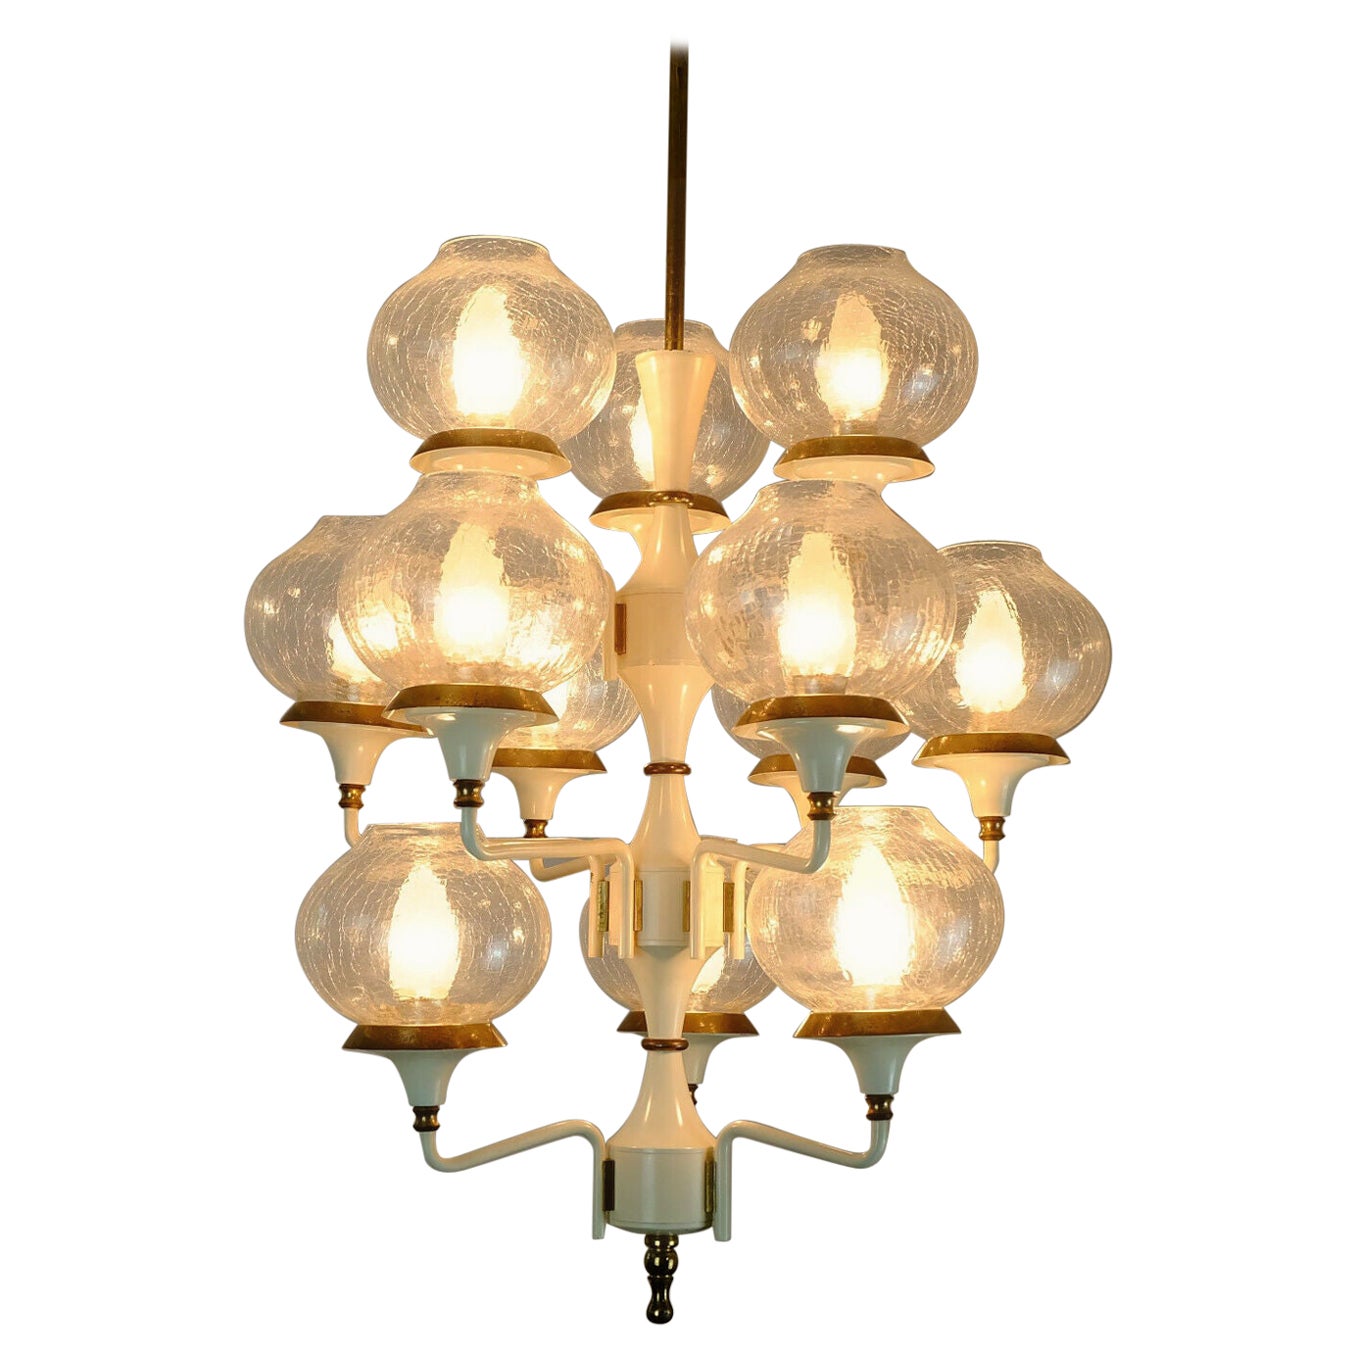 Midcentury Chandelier Metal Brass 12 Crackle Glass Shades For Sale